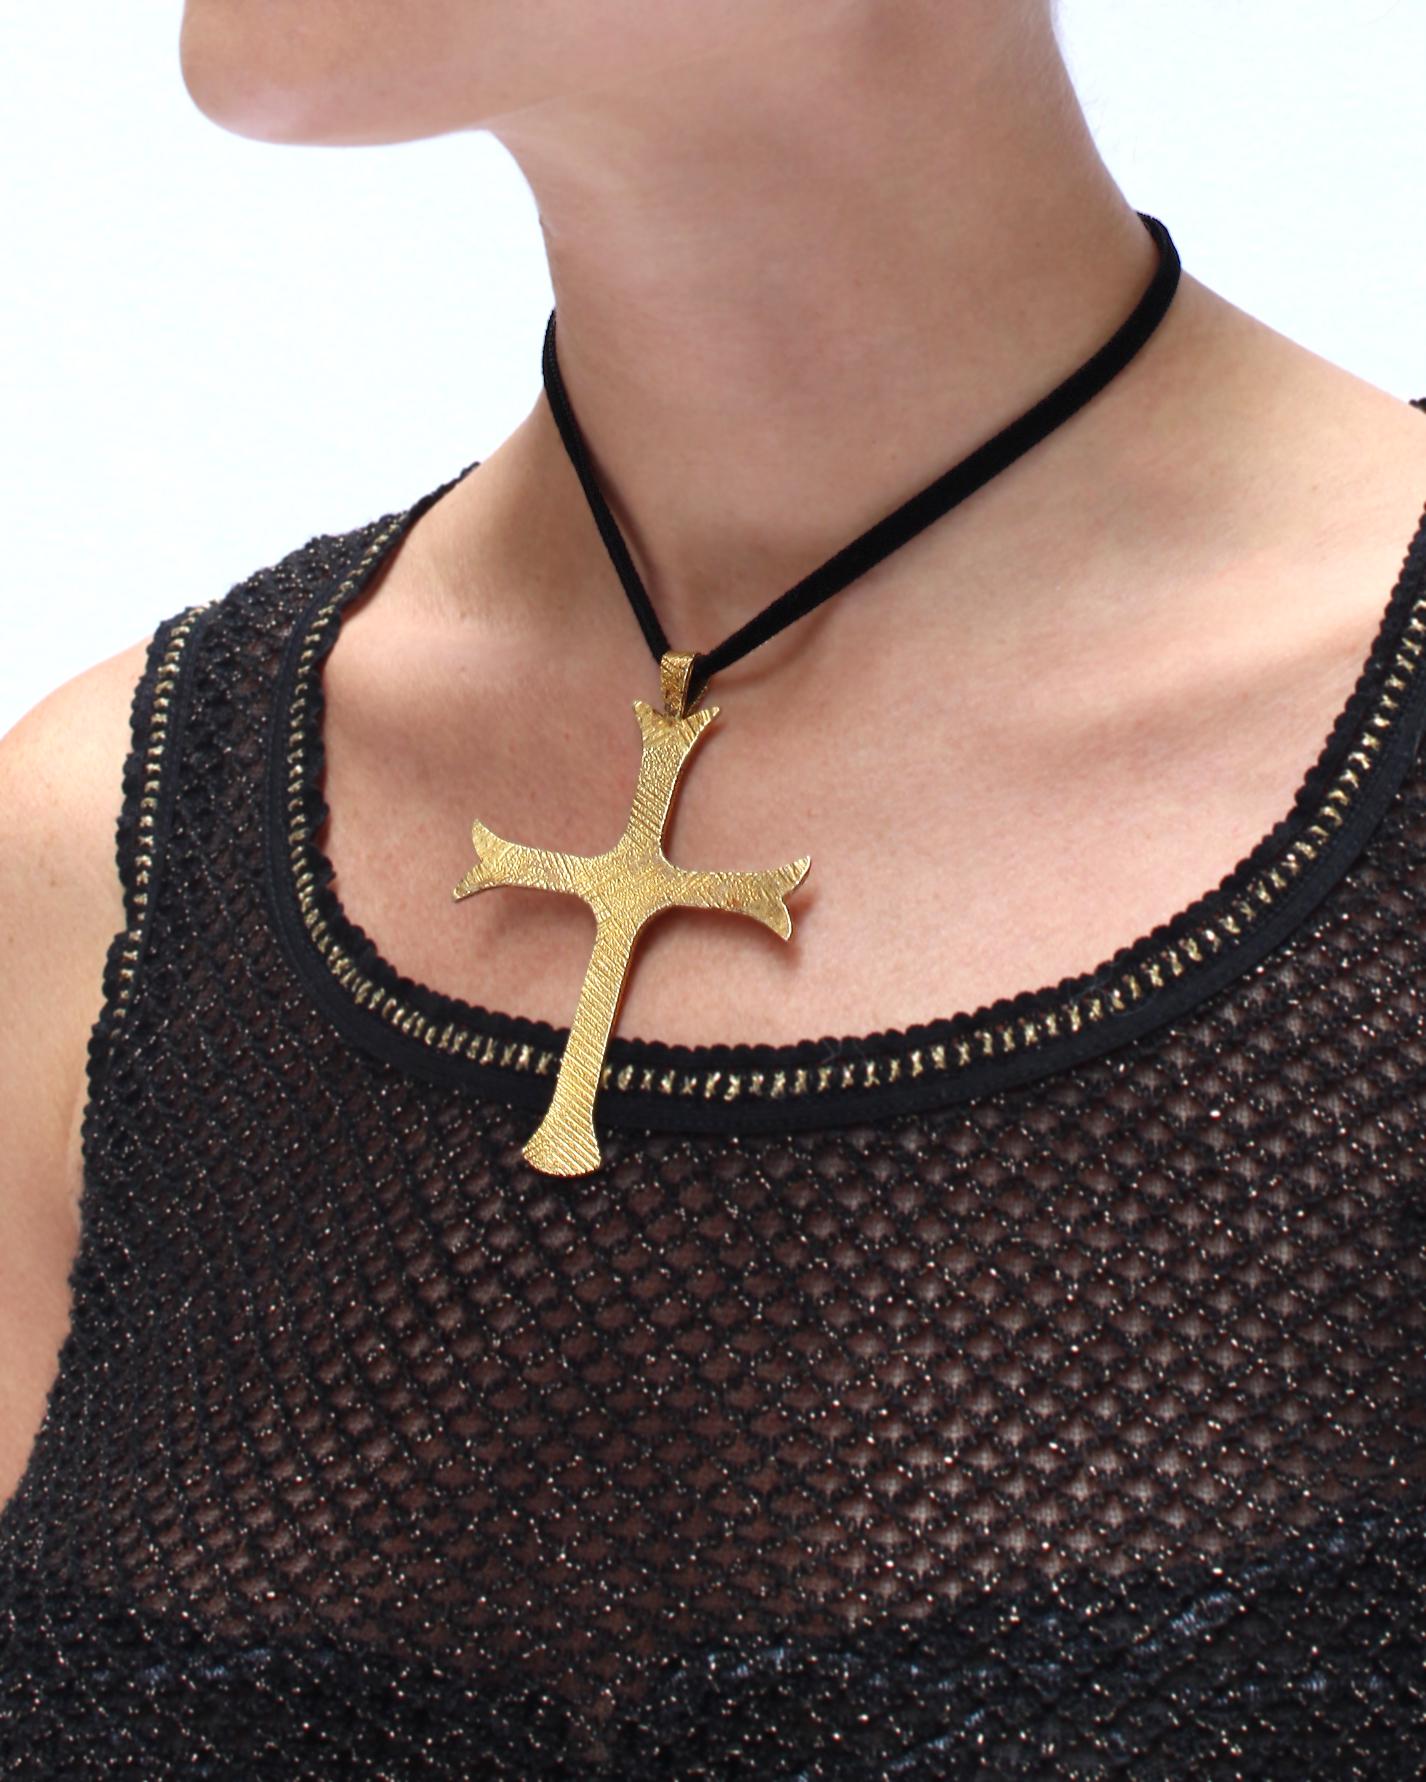 This enormous vintage gold cross is such a statement piece. It was made by Mignon Faget, a New Orleans jeweler known for her hand-crafted quality. The surface is emblazoned with a crosshatch texture, with hand applied patina that accentuates texture